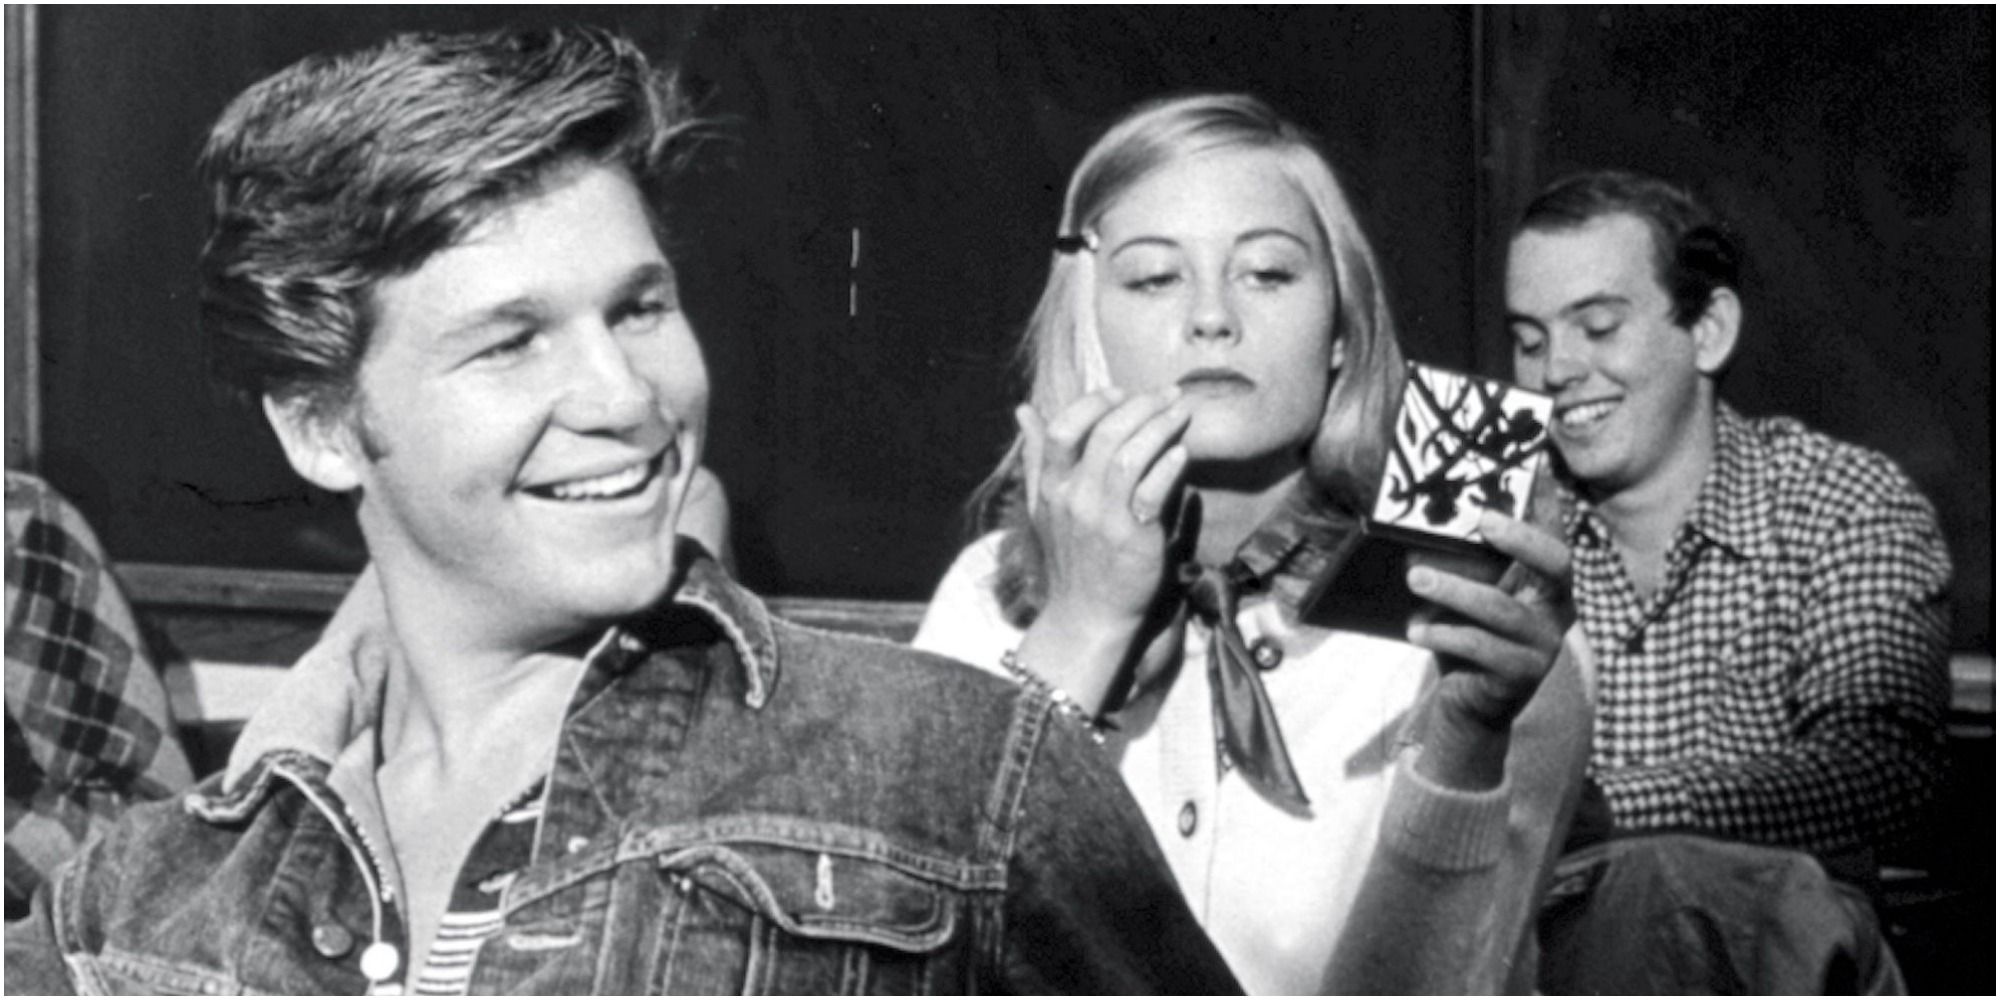 A screenshot of Jeff Bridges as Duane Jackson and Cybill Shepherd as Jacy Farrow from The Last Picture Show